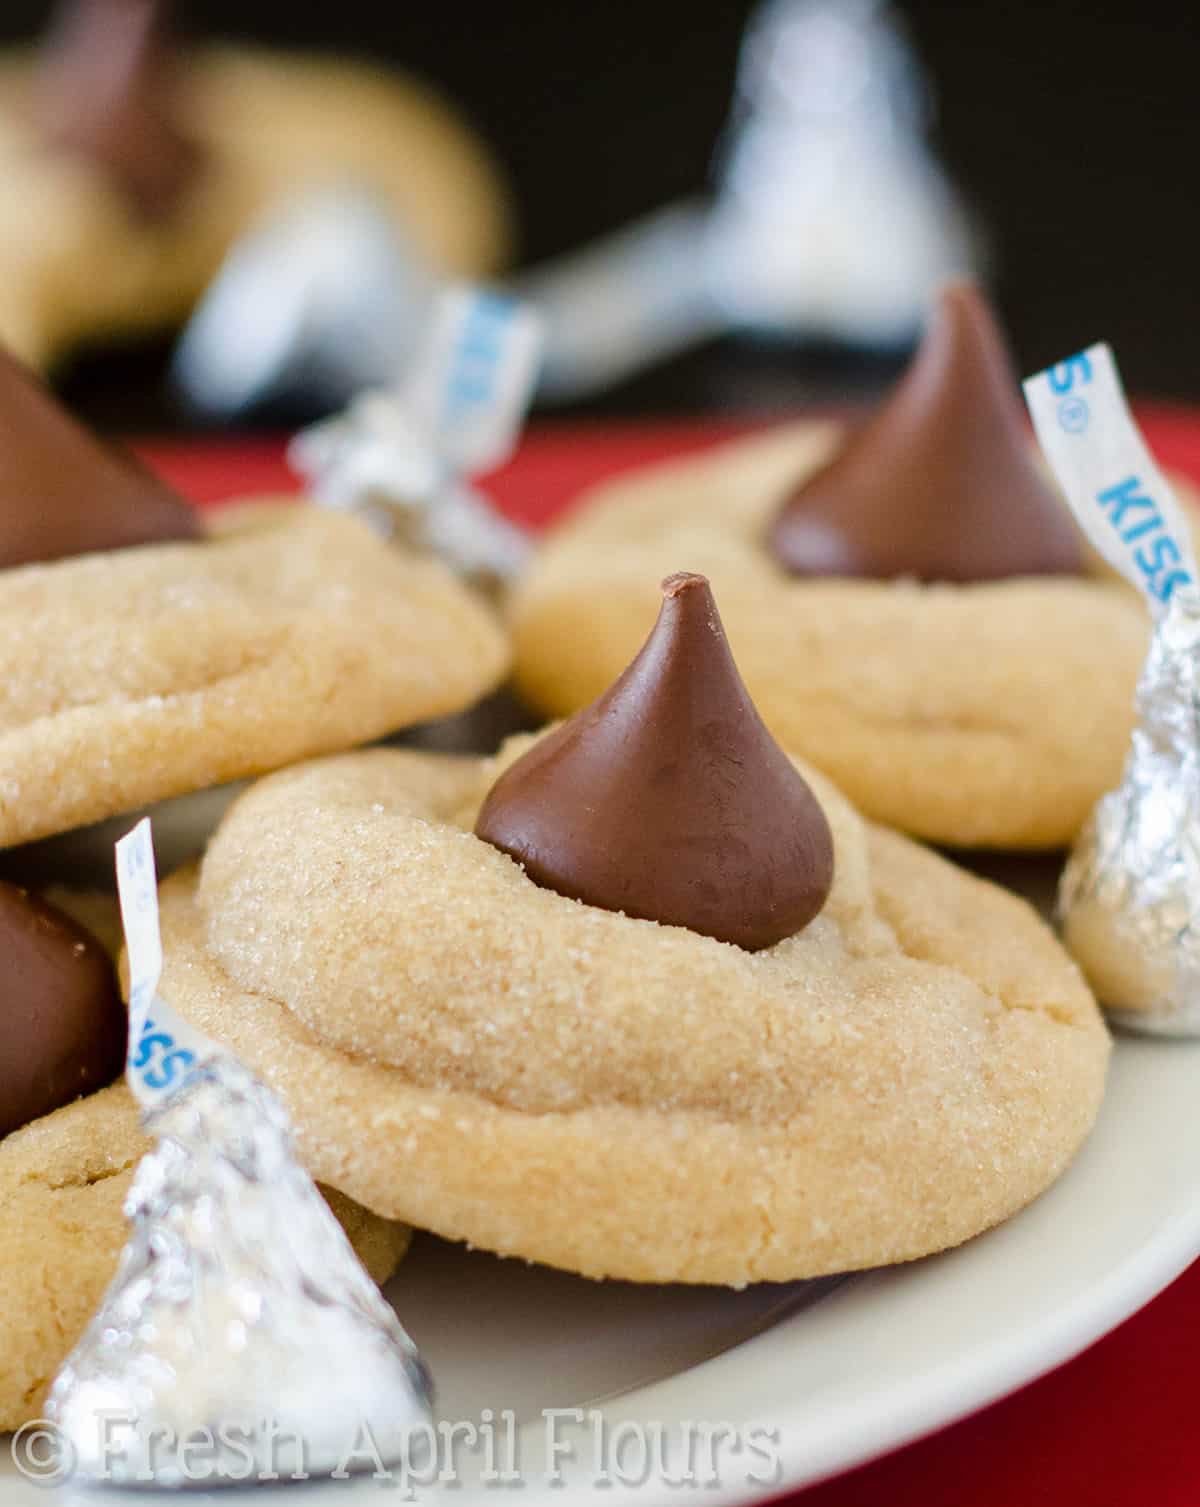 Peanut butter blossom cookies on a plate with Hershey's kisses.